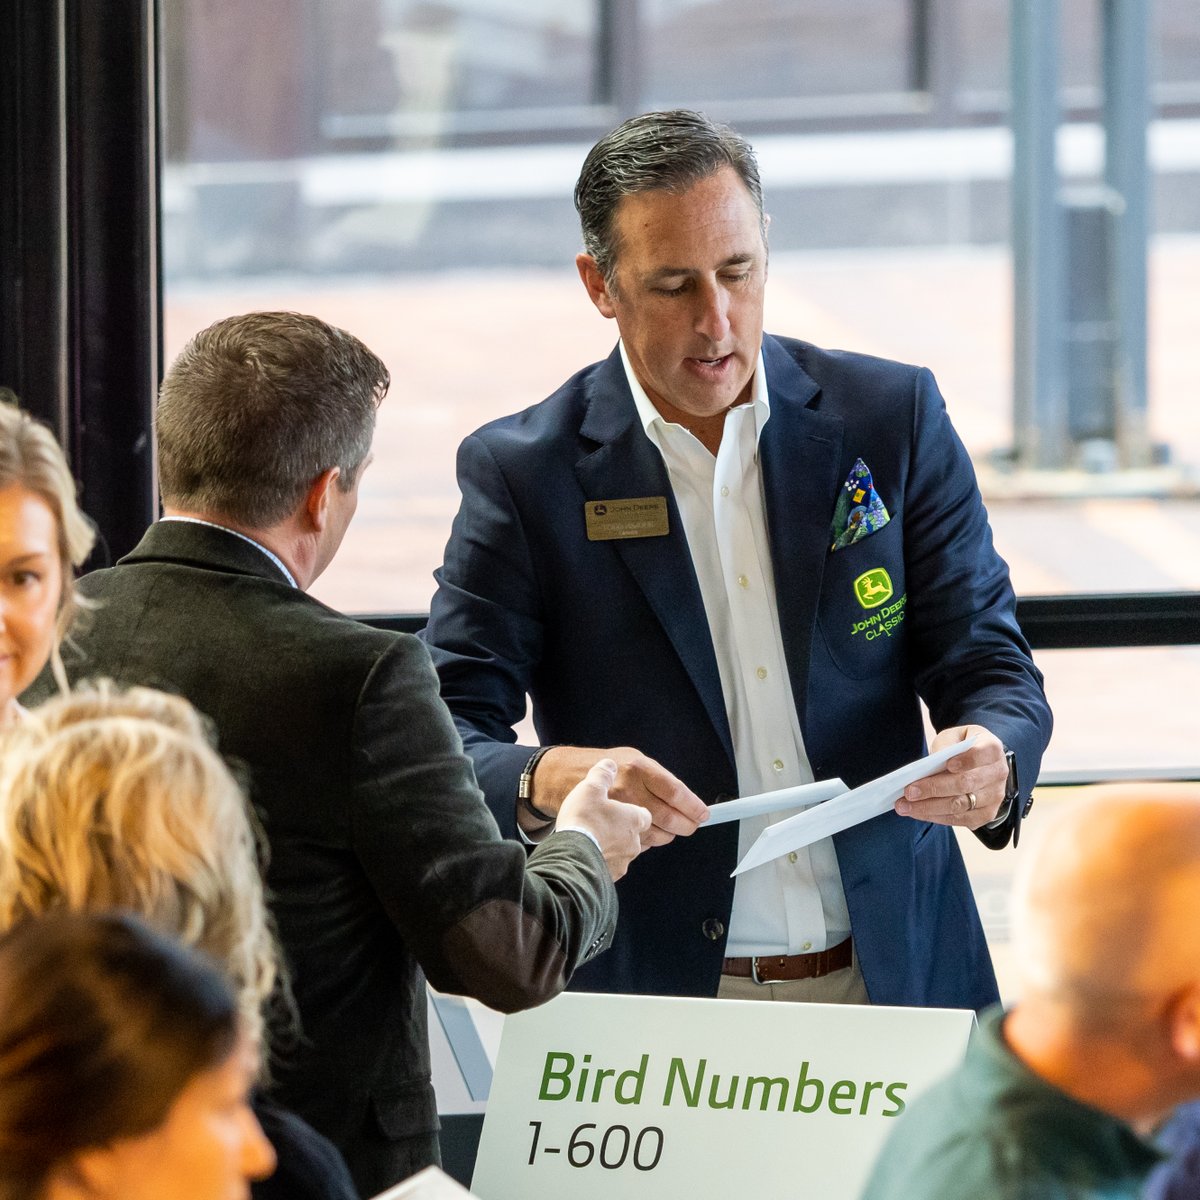 Photo's from yesterday's record-setting #BirdiesForCharity announcement & check distribution 📸: @jrhowell